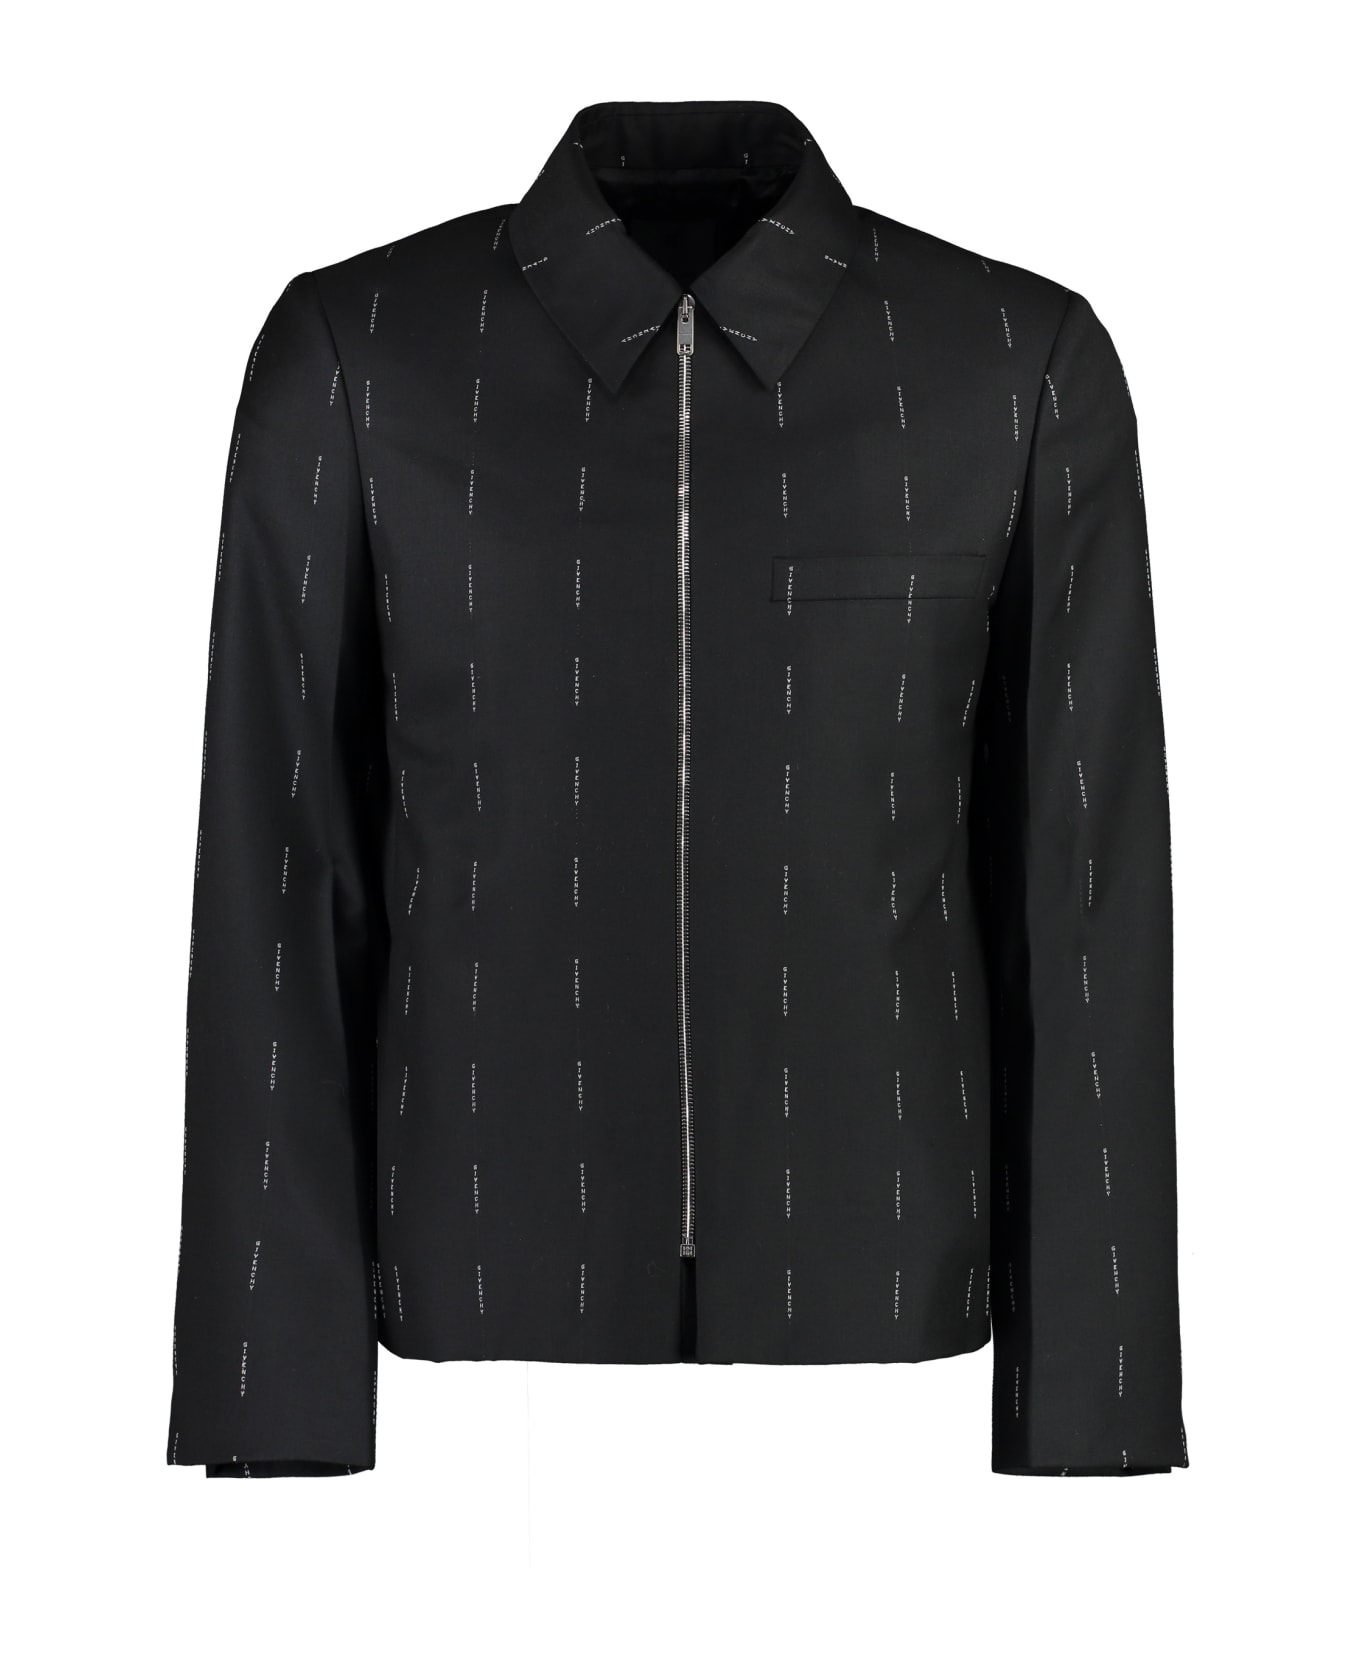 Givenchy Embroidered Wool Jacket - black